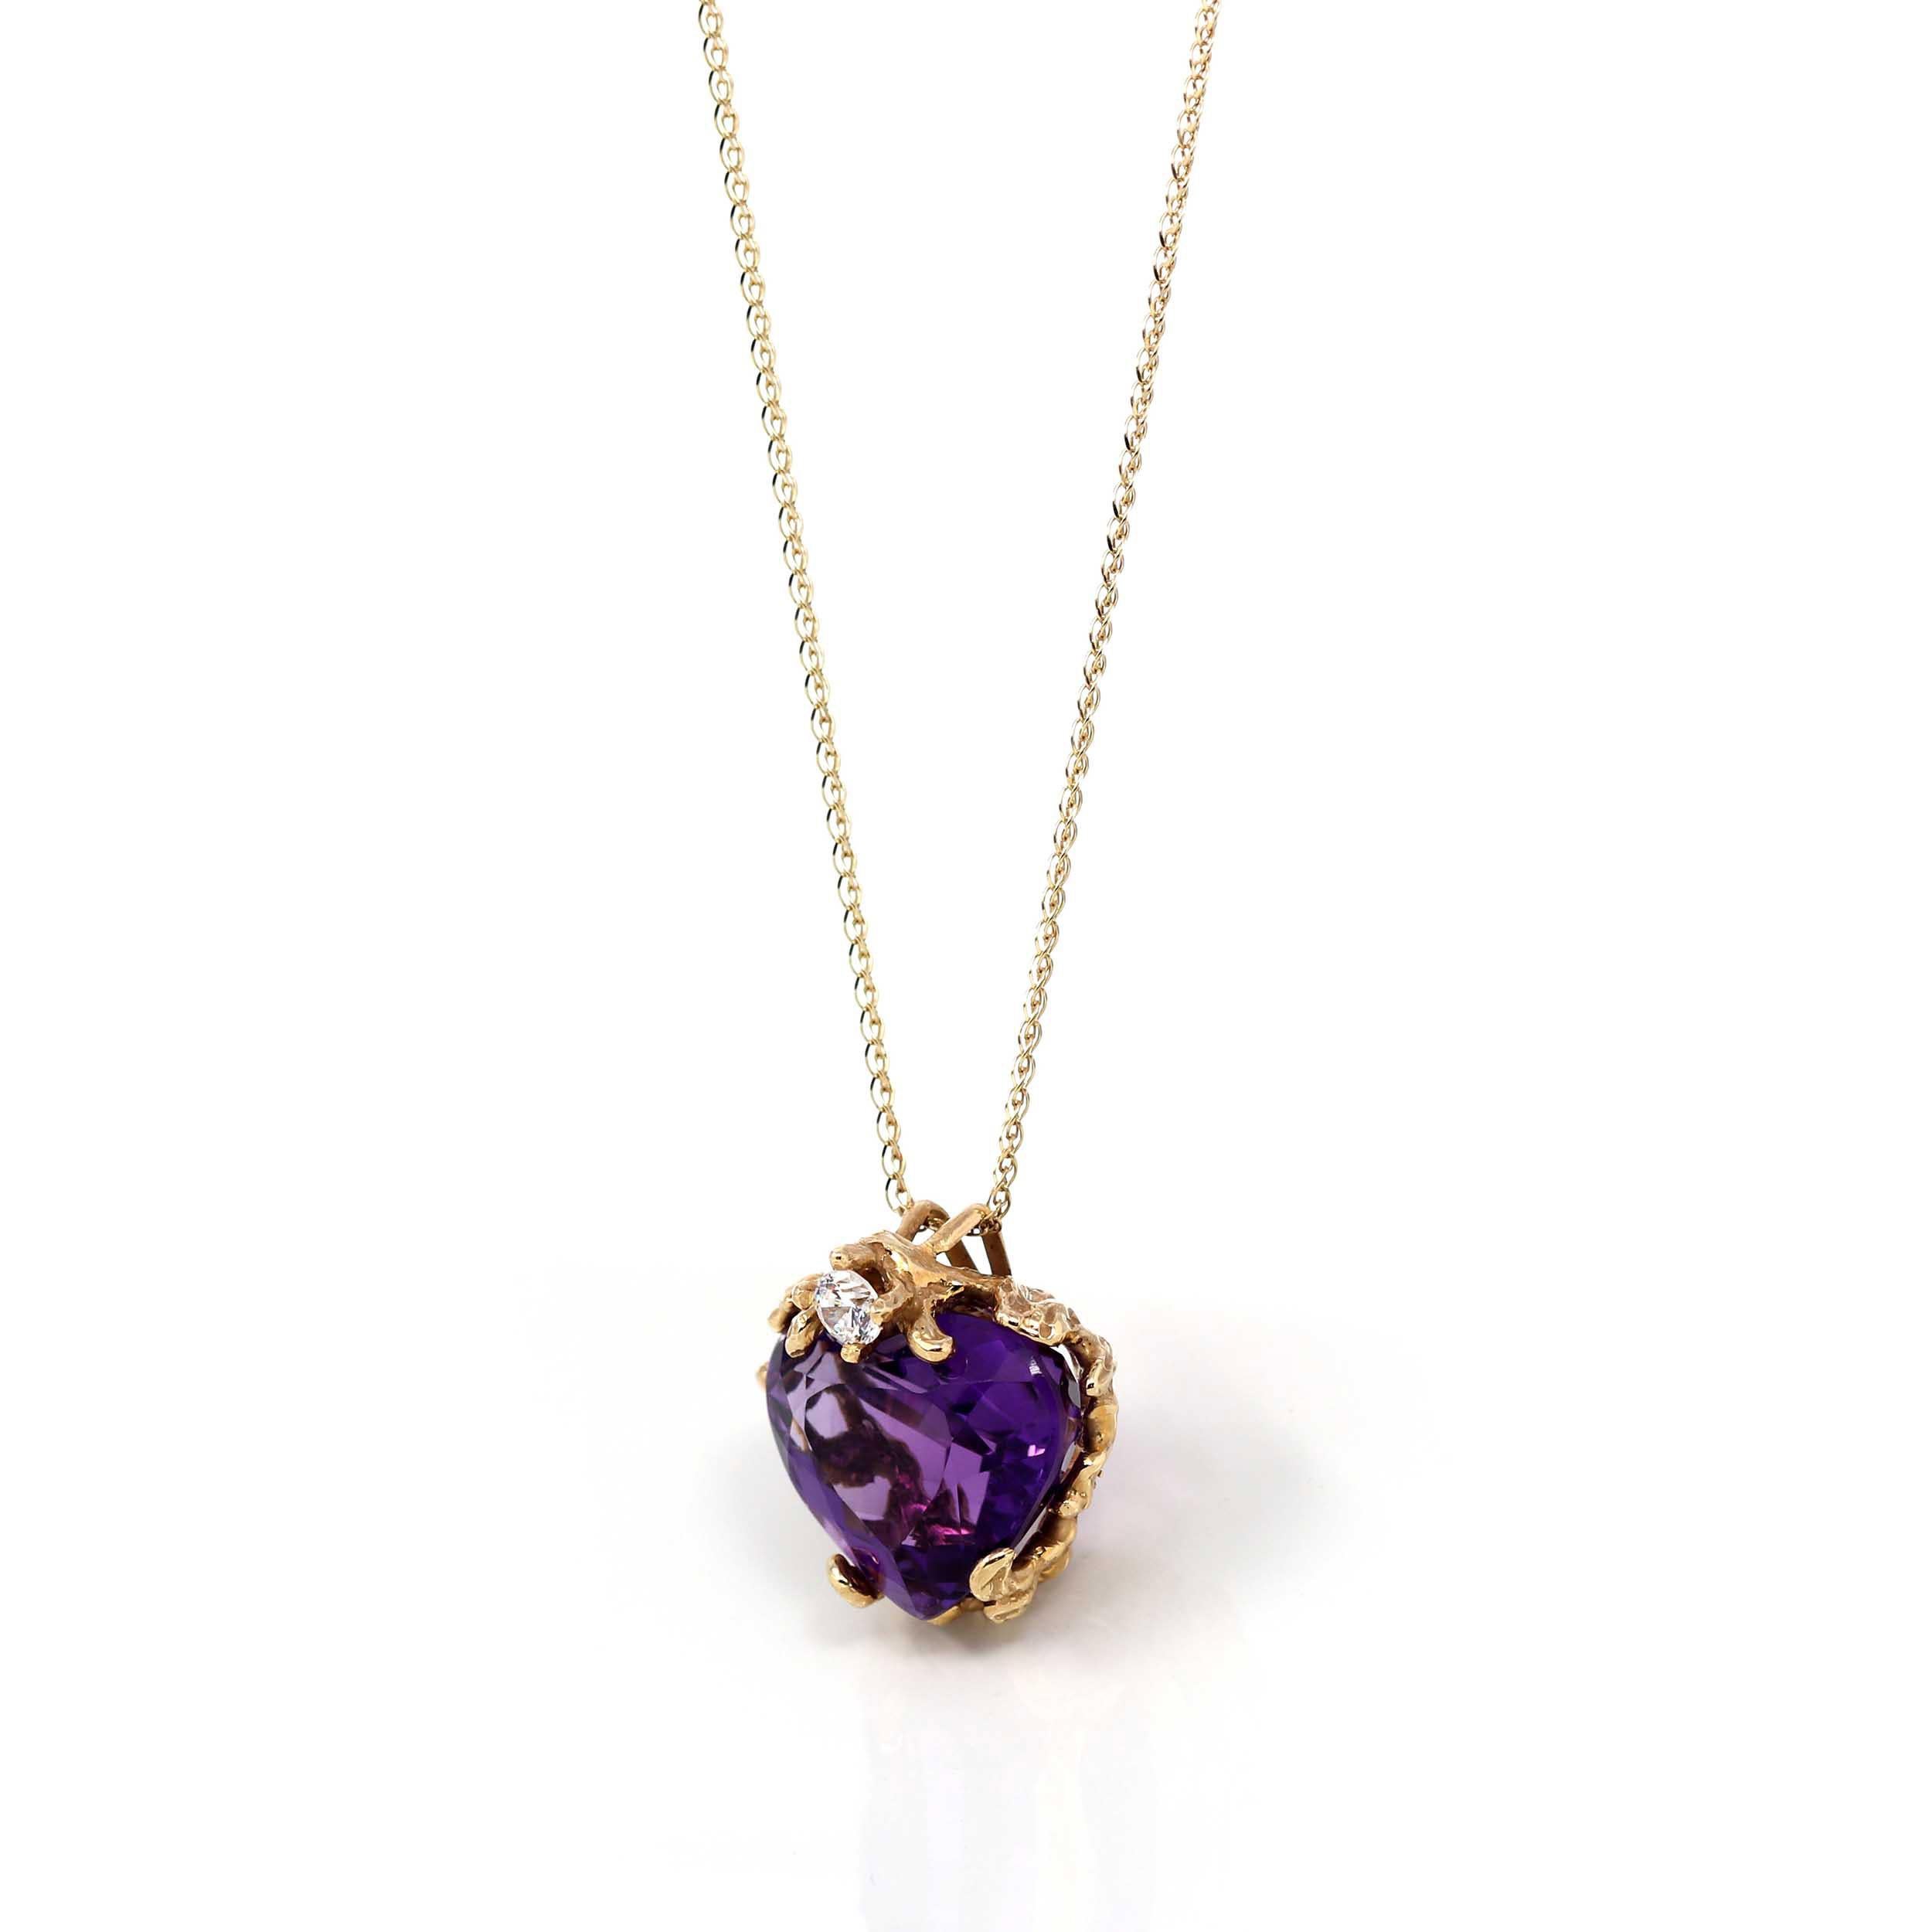 * INTRODUCTION----- This pendant is made with high-quality genuine 5.84ct AAA nice purple amethyst & SI genuine diamonds. It looks so royal and unique design. The luxury purple color stands out like no other. And the whole amethyst is so vibrant.